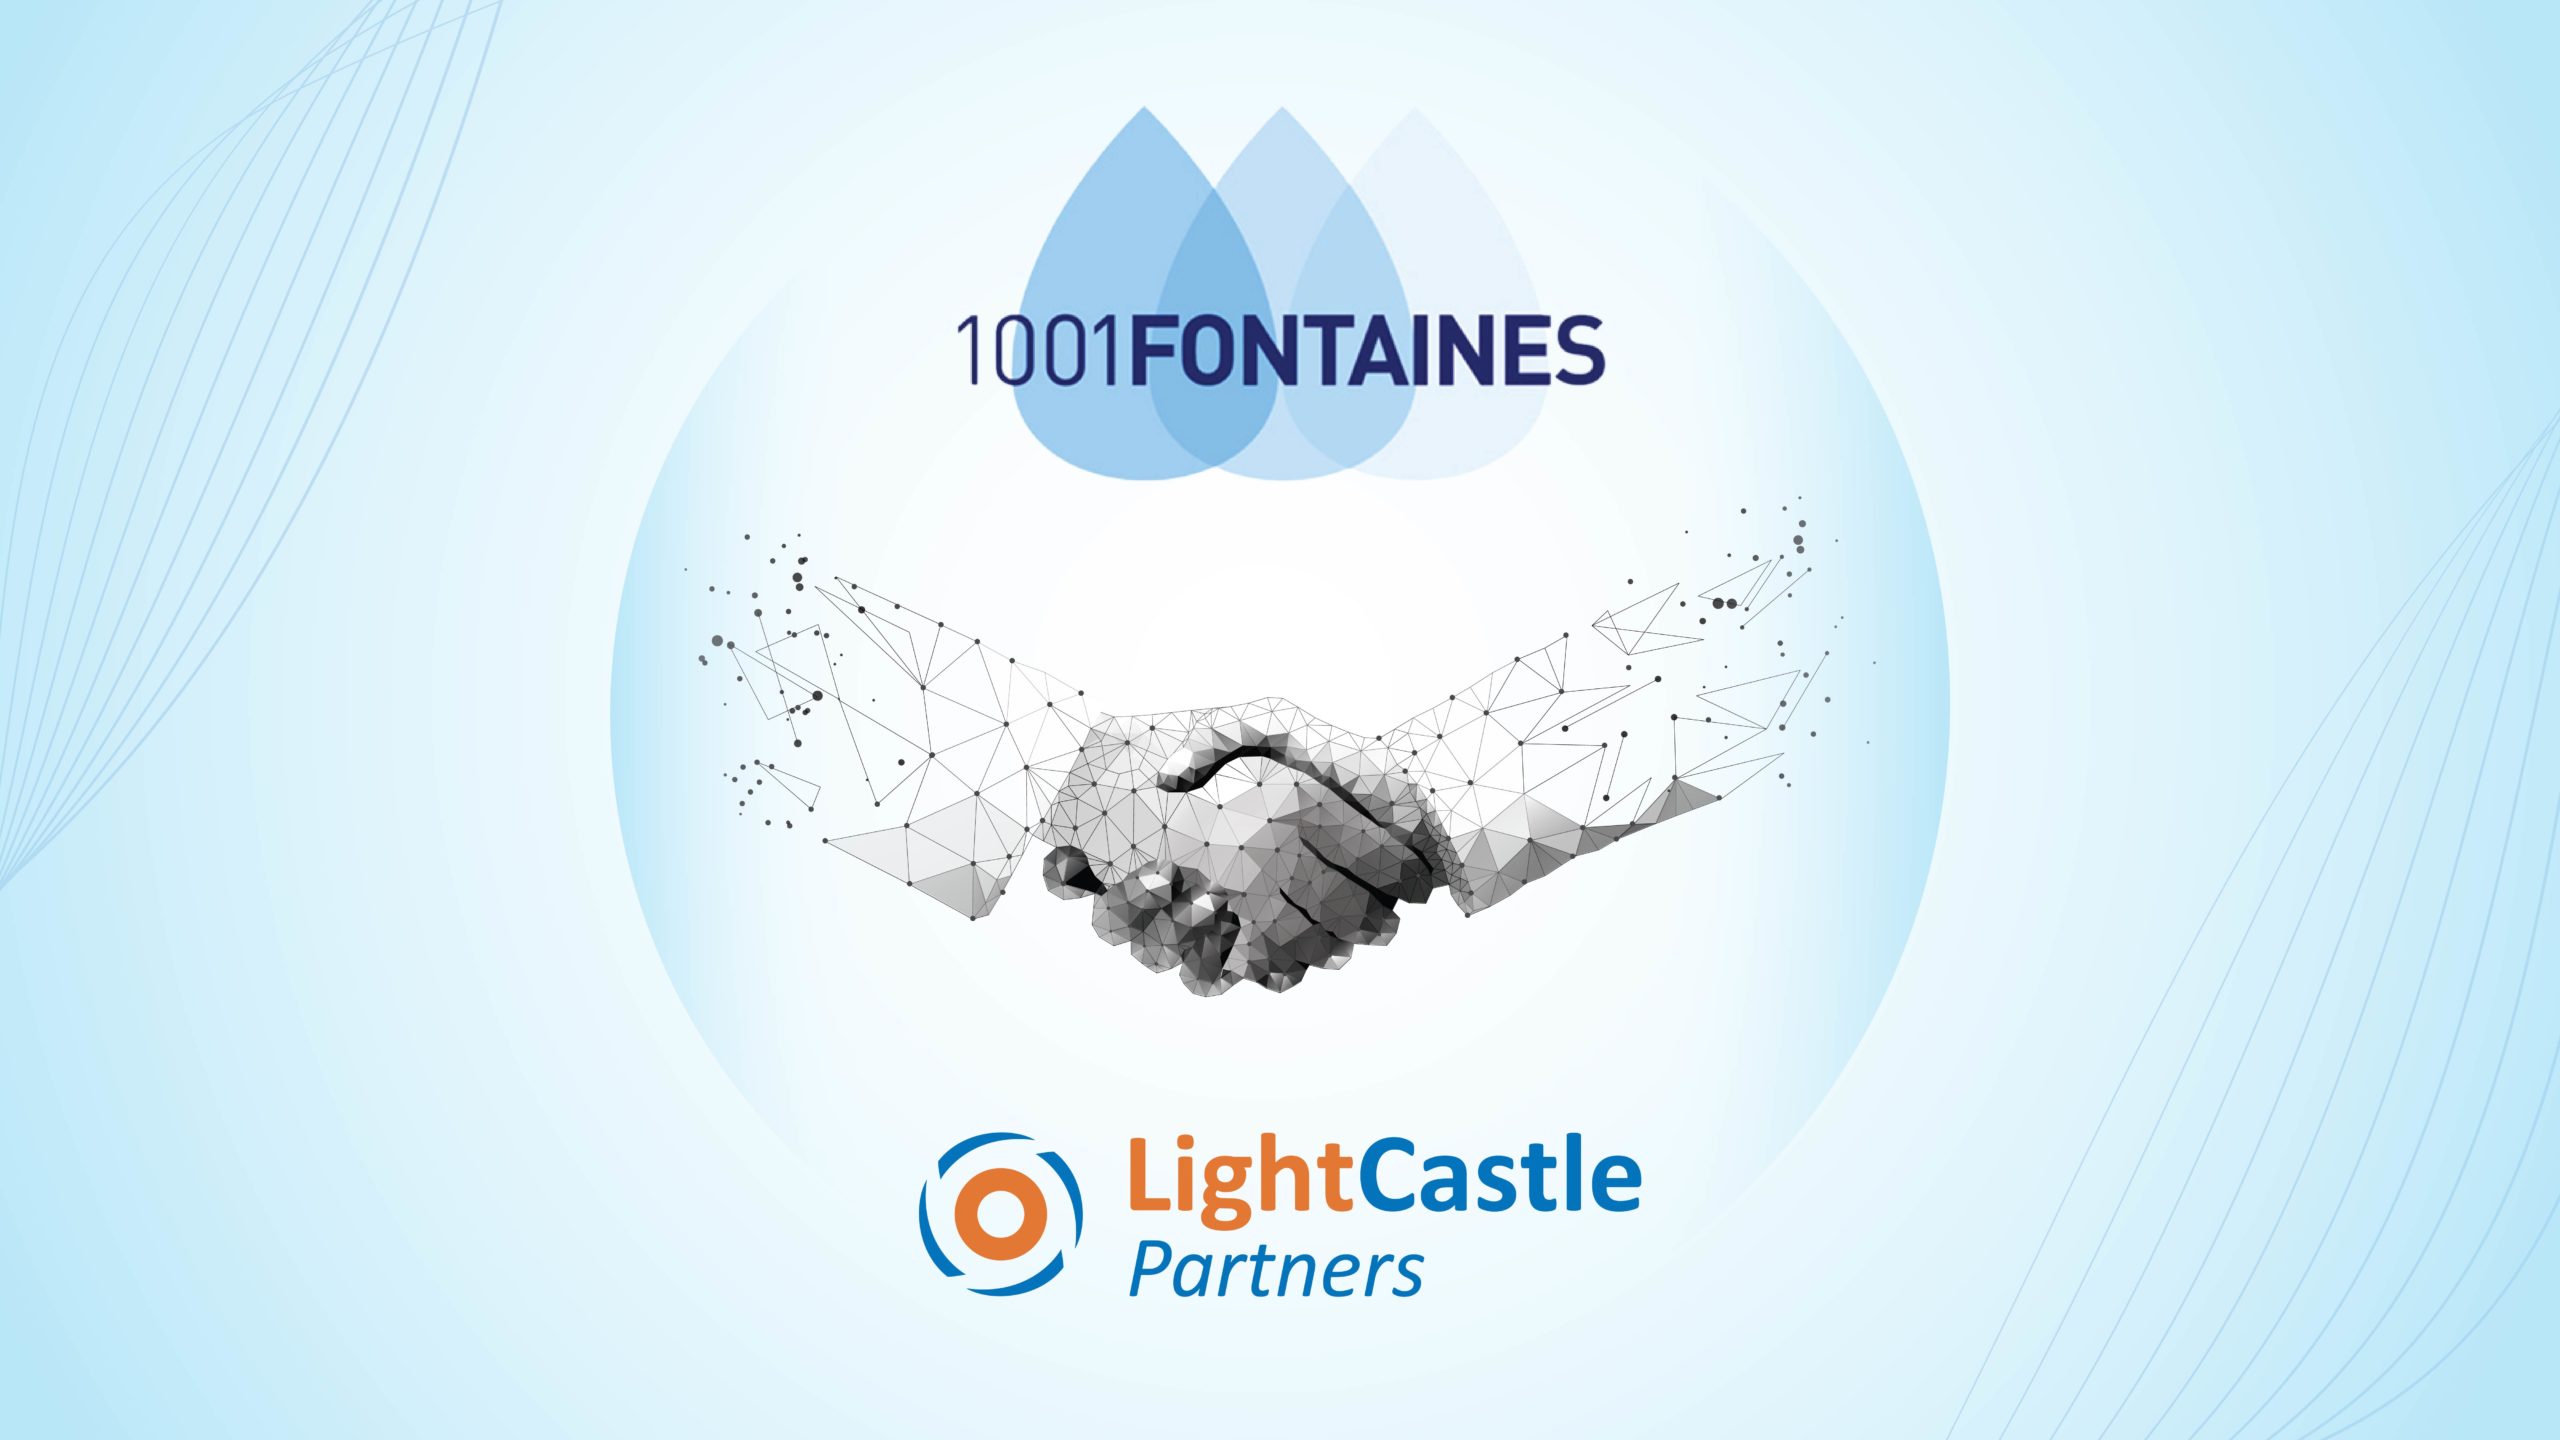 LightCastle Signs Contract With 1001fontaines to Develop a Strategic Plan For Scaling up Franchising Model for Safe Drinking Water in Bangladesh